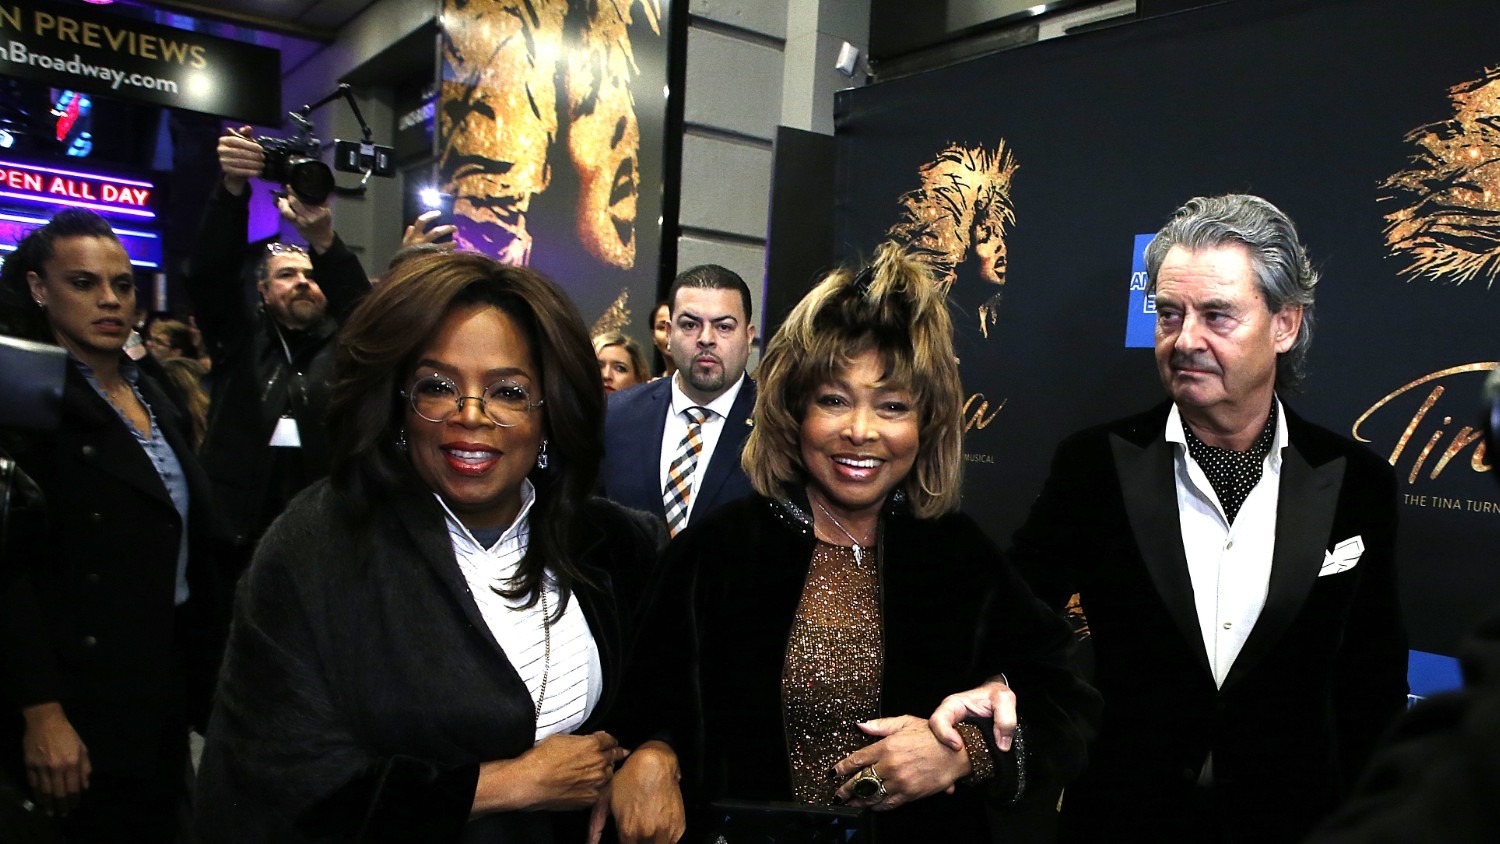 Tina Turner Steps Out For Opening Of Broadway Musical Based On Her Life